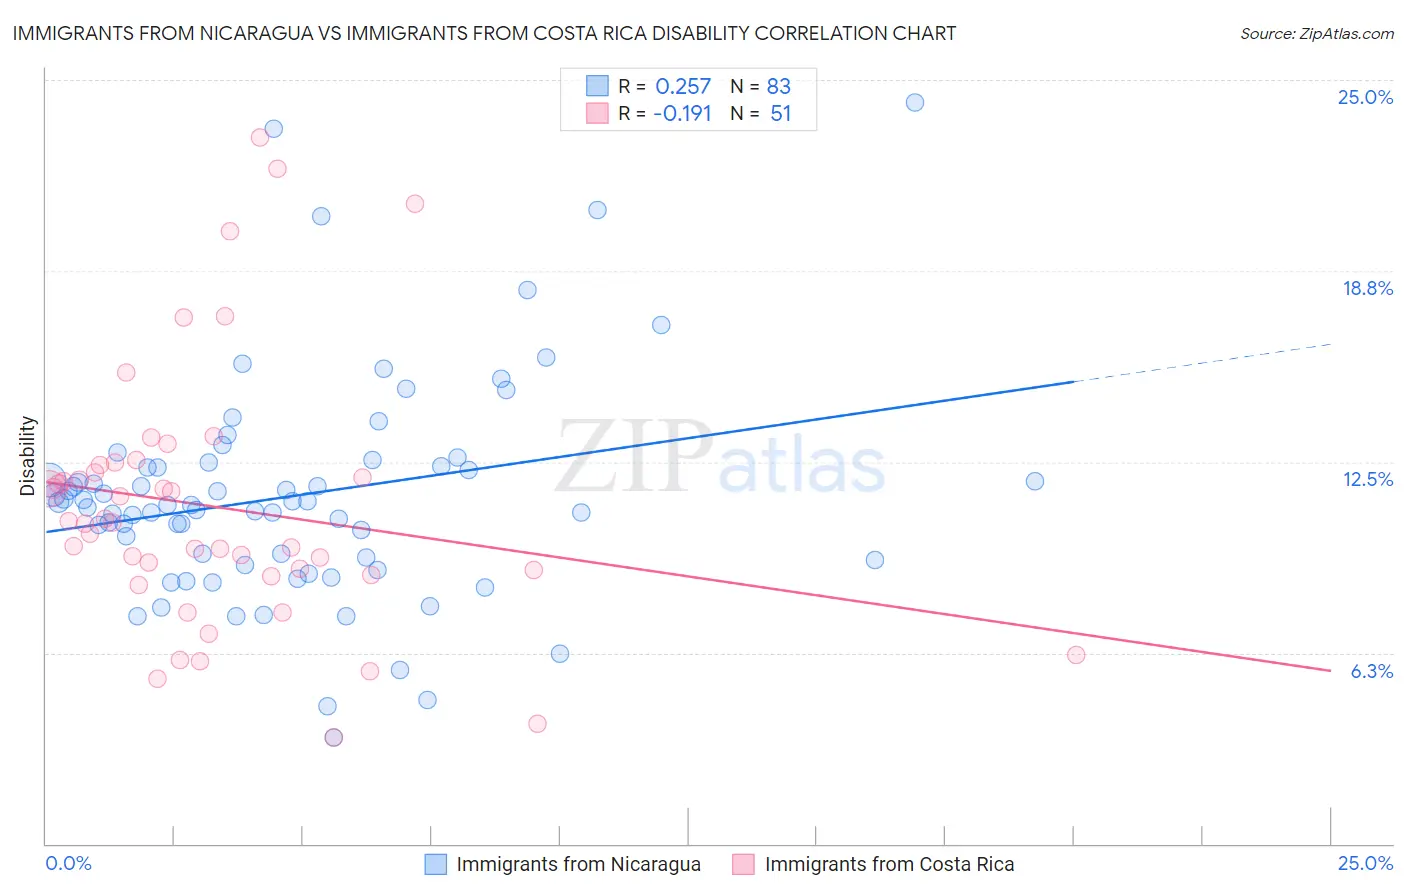 Immigrants from Nicaragua vs Immigrants from Costa Rica Disability